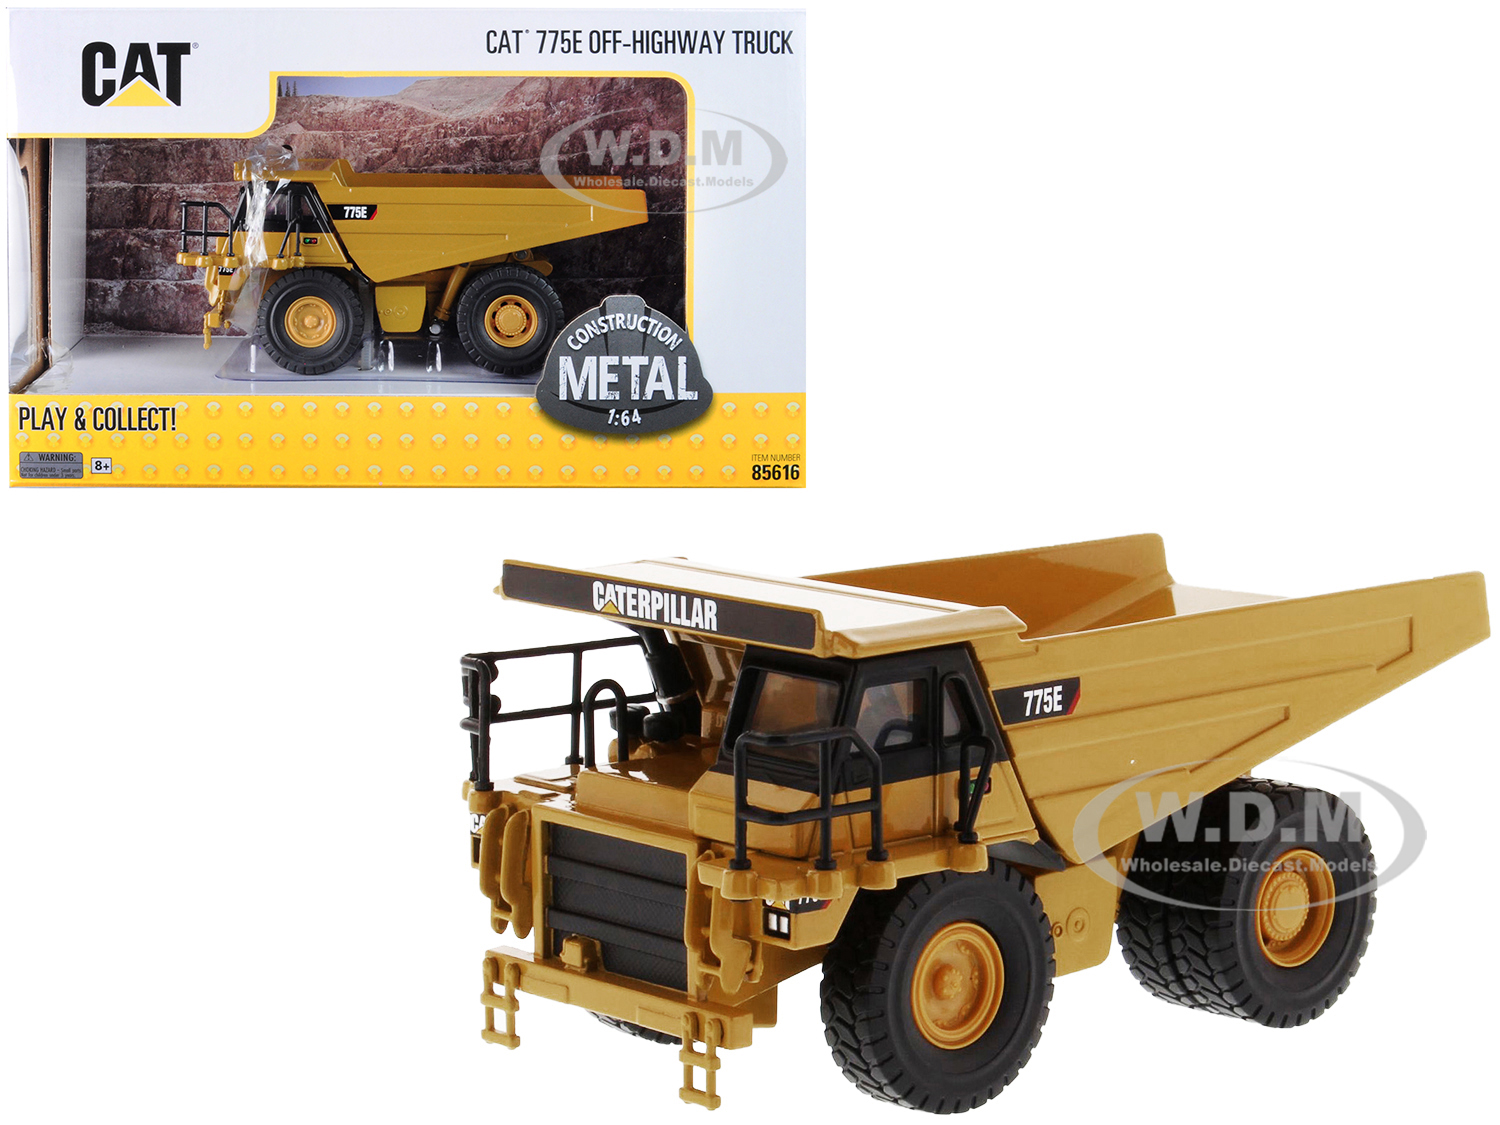 Cat Caterpillar 775e Off-highway Dump Truck "play & Collect" Series 1/64 Diecast Model By Diecast Masters